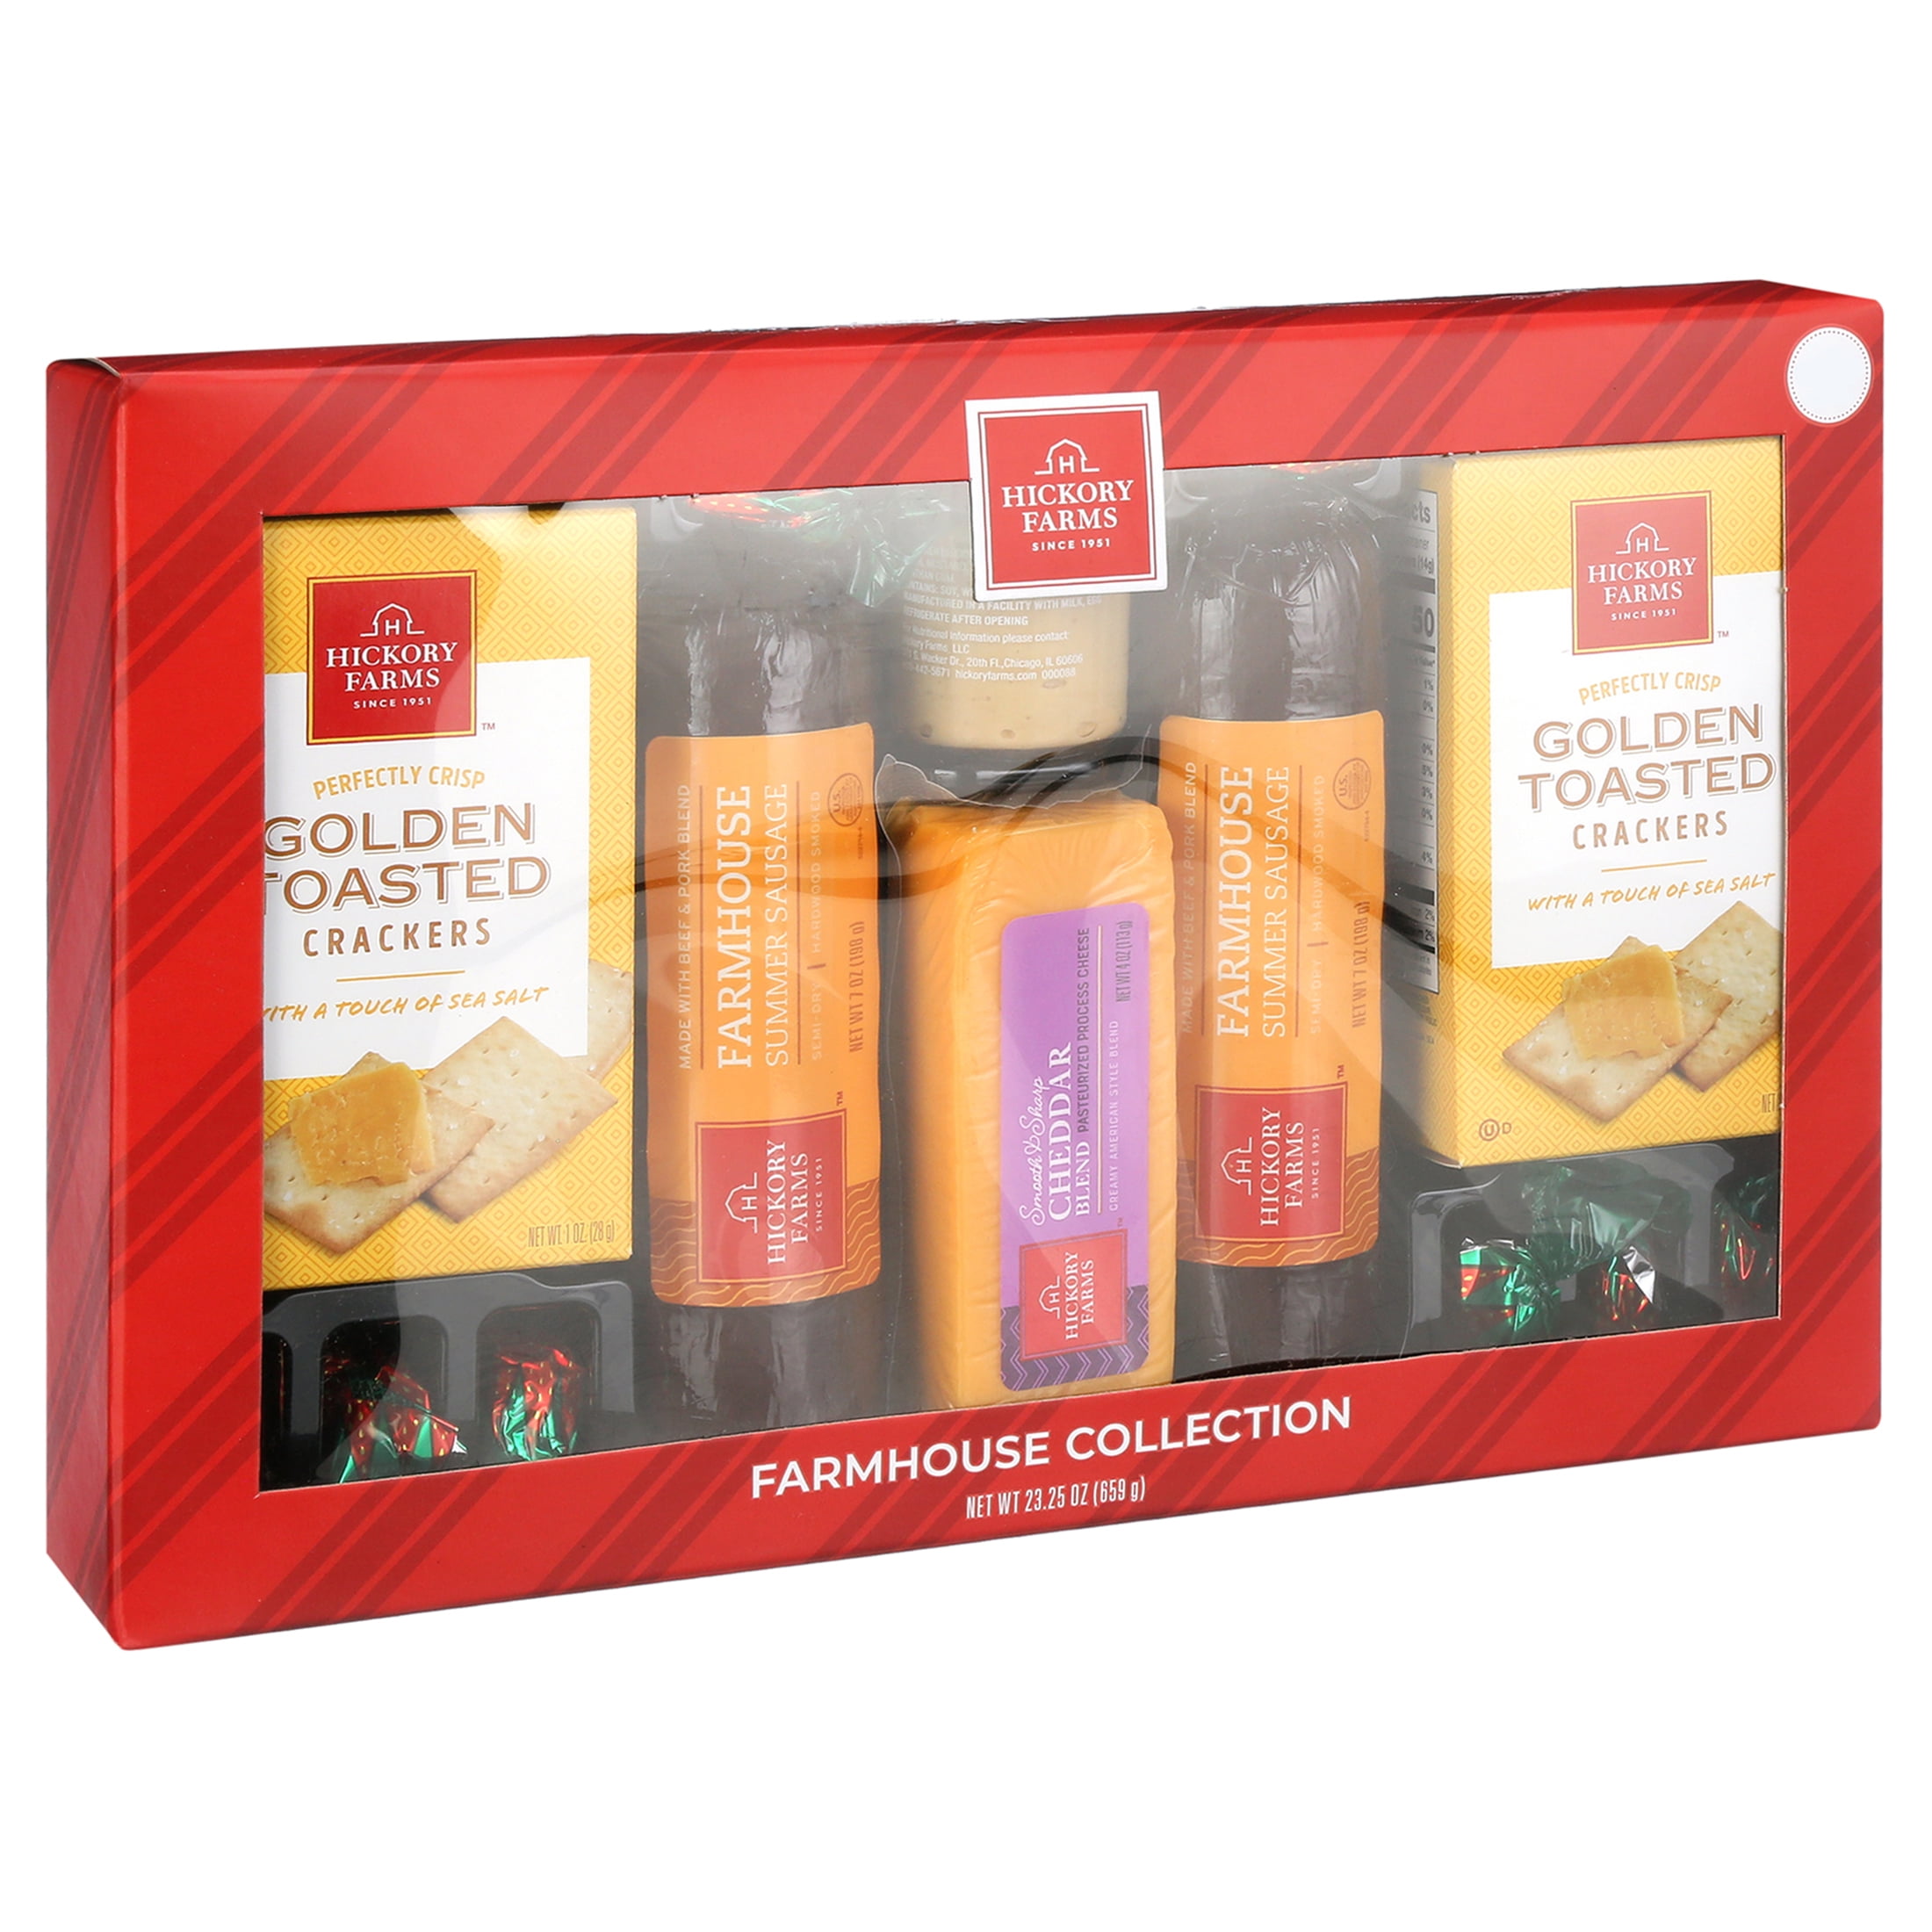 Hickory Farms Holiday Meat & Cheese Sampler Gift Box 9.25 oz